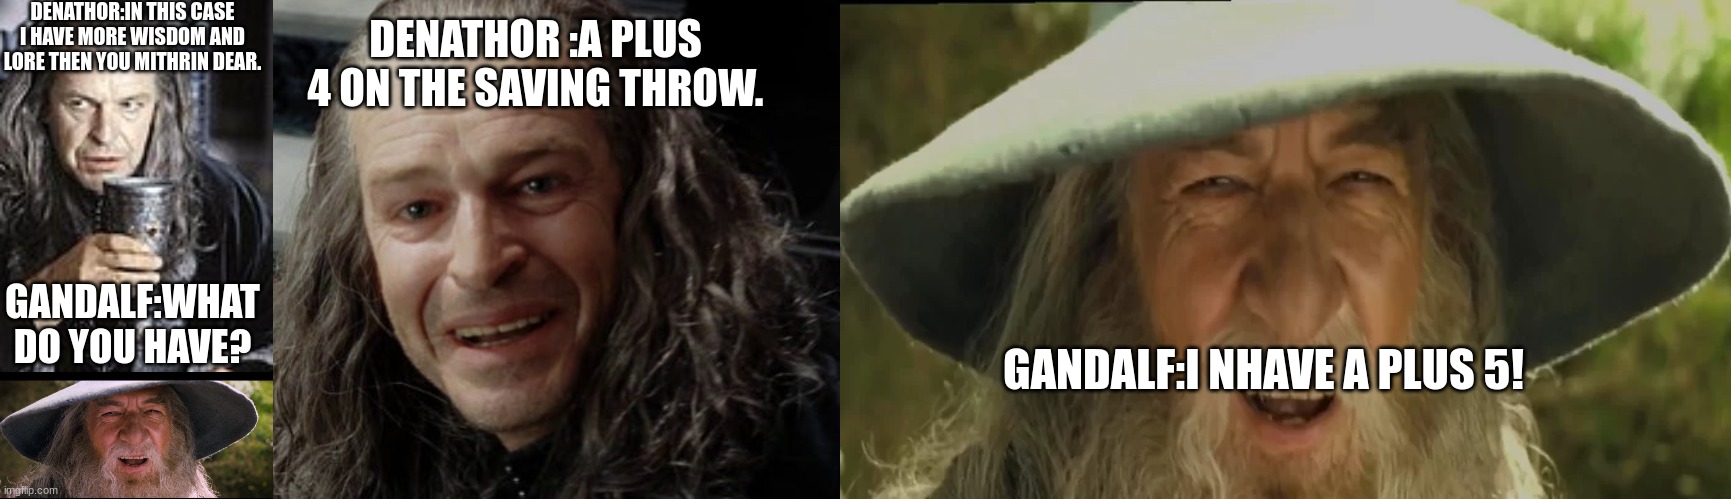 LOTR DND MEME A PLUS 5 ON SAVING THROW!!! | DENATHOR:IN THIS CASE I HAVE MORE WISDOM AND LORE THEN YOU MITHRIN DEAR. DENATHOR :A PLUS 4 ON THE SAVING THROW. GANDALF:WHAT DO YOU HAVE? GANDALF:I NHAVE A PLUS 5! | image tagged in lord of the rings,and everybody loses their minds,dnd,dungeons and dragons | made w/ Imgflip meme maker